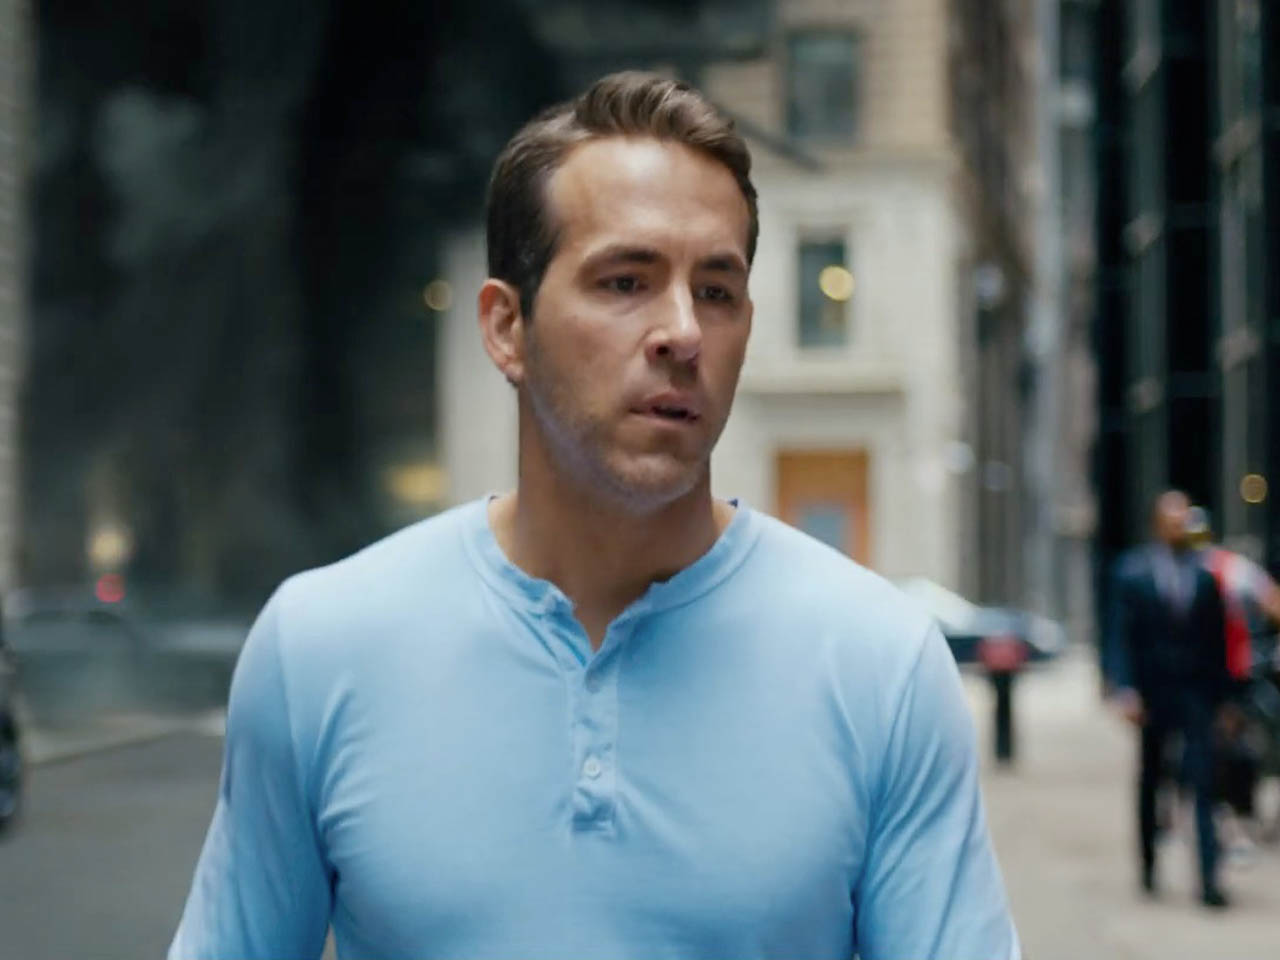 Free Guy trailer - Ryan Reynolds gets in the game | The Nerdy